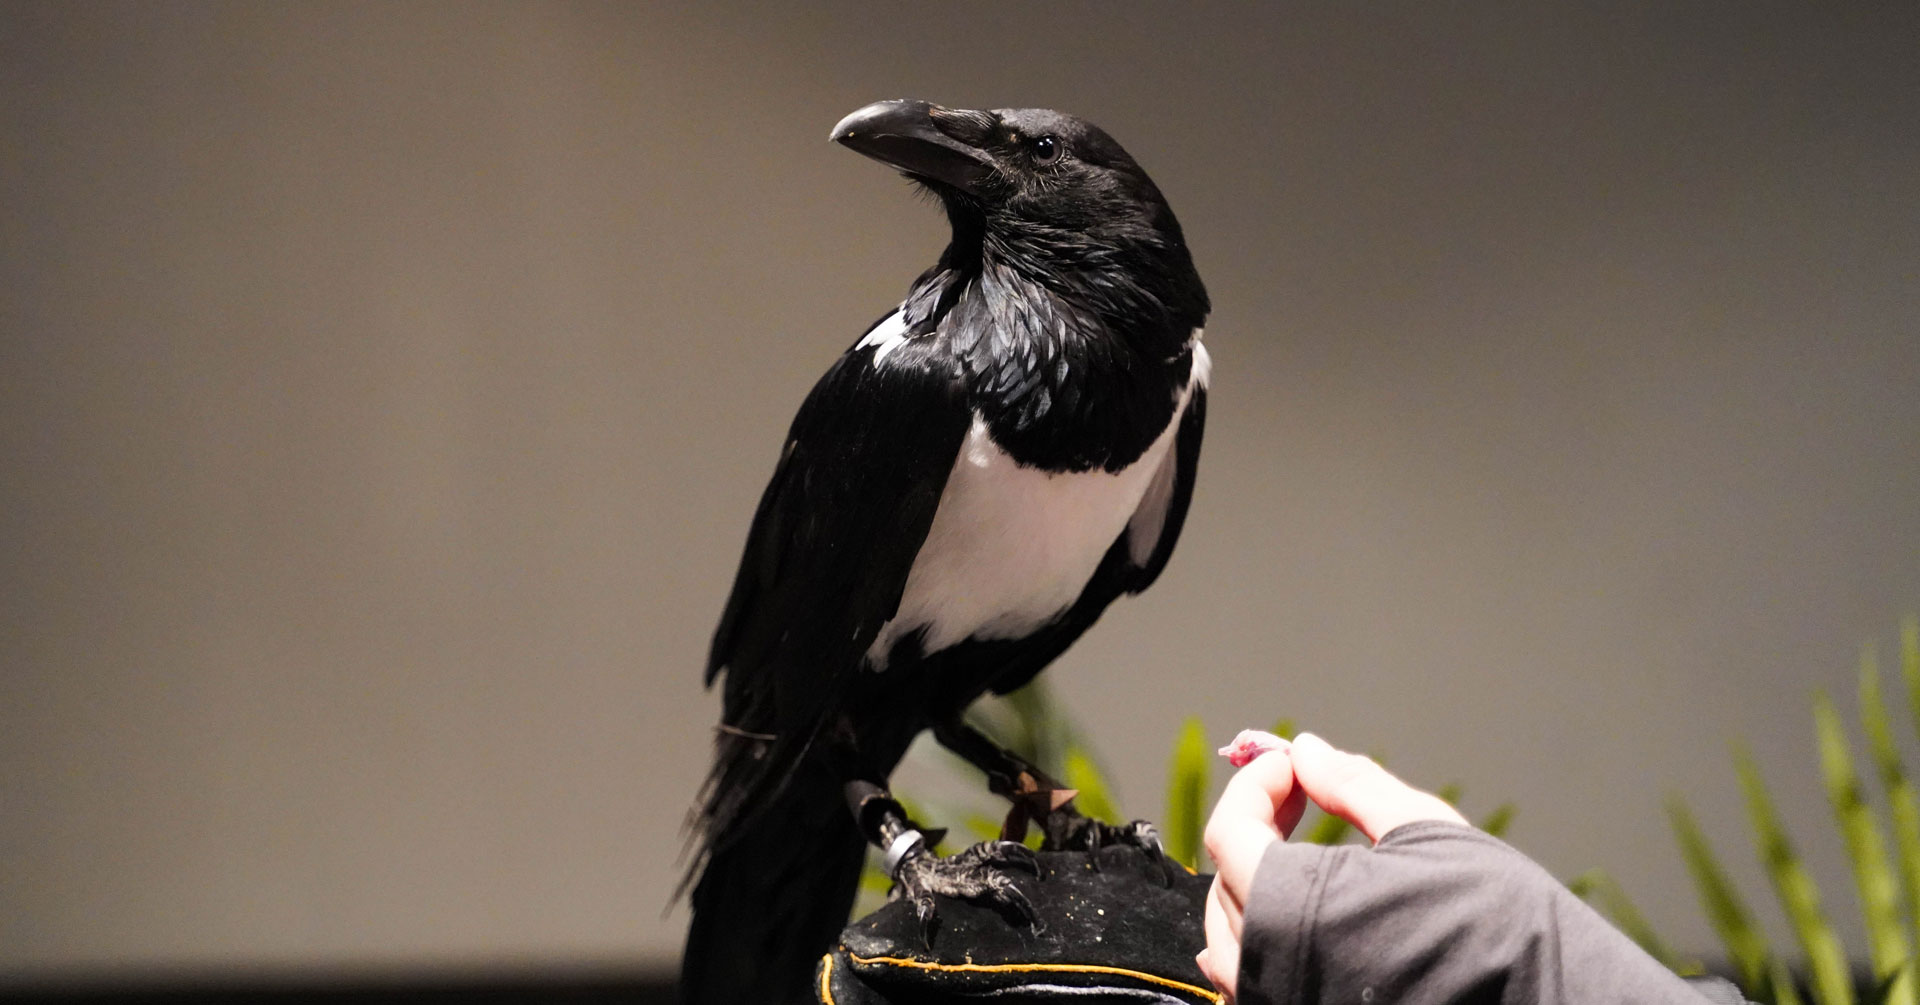 A crow from the museum's animal encounter